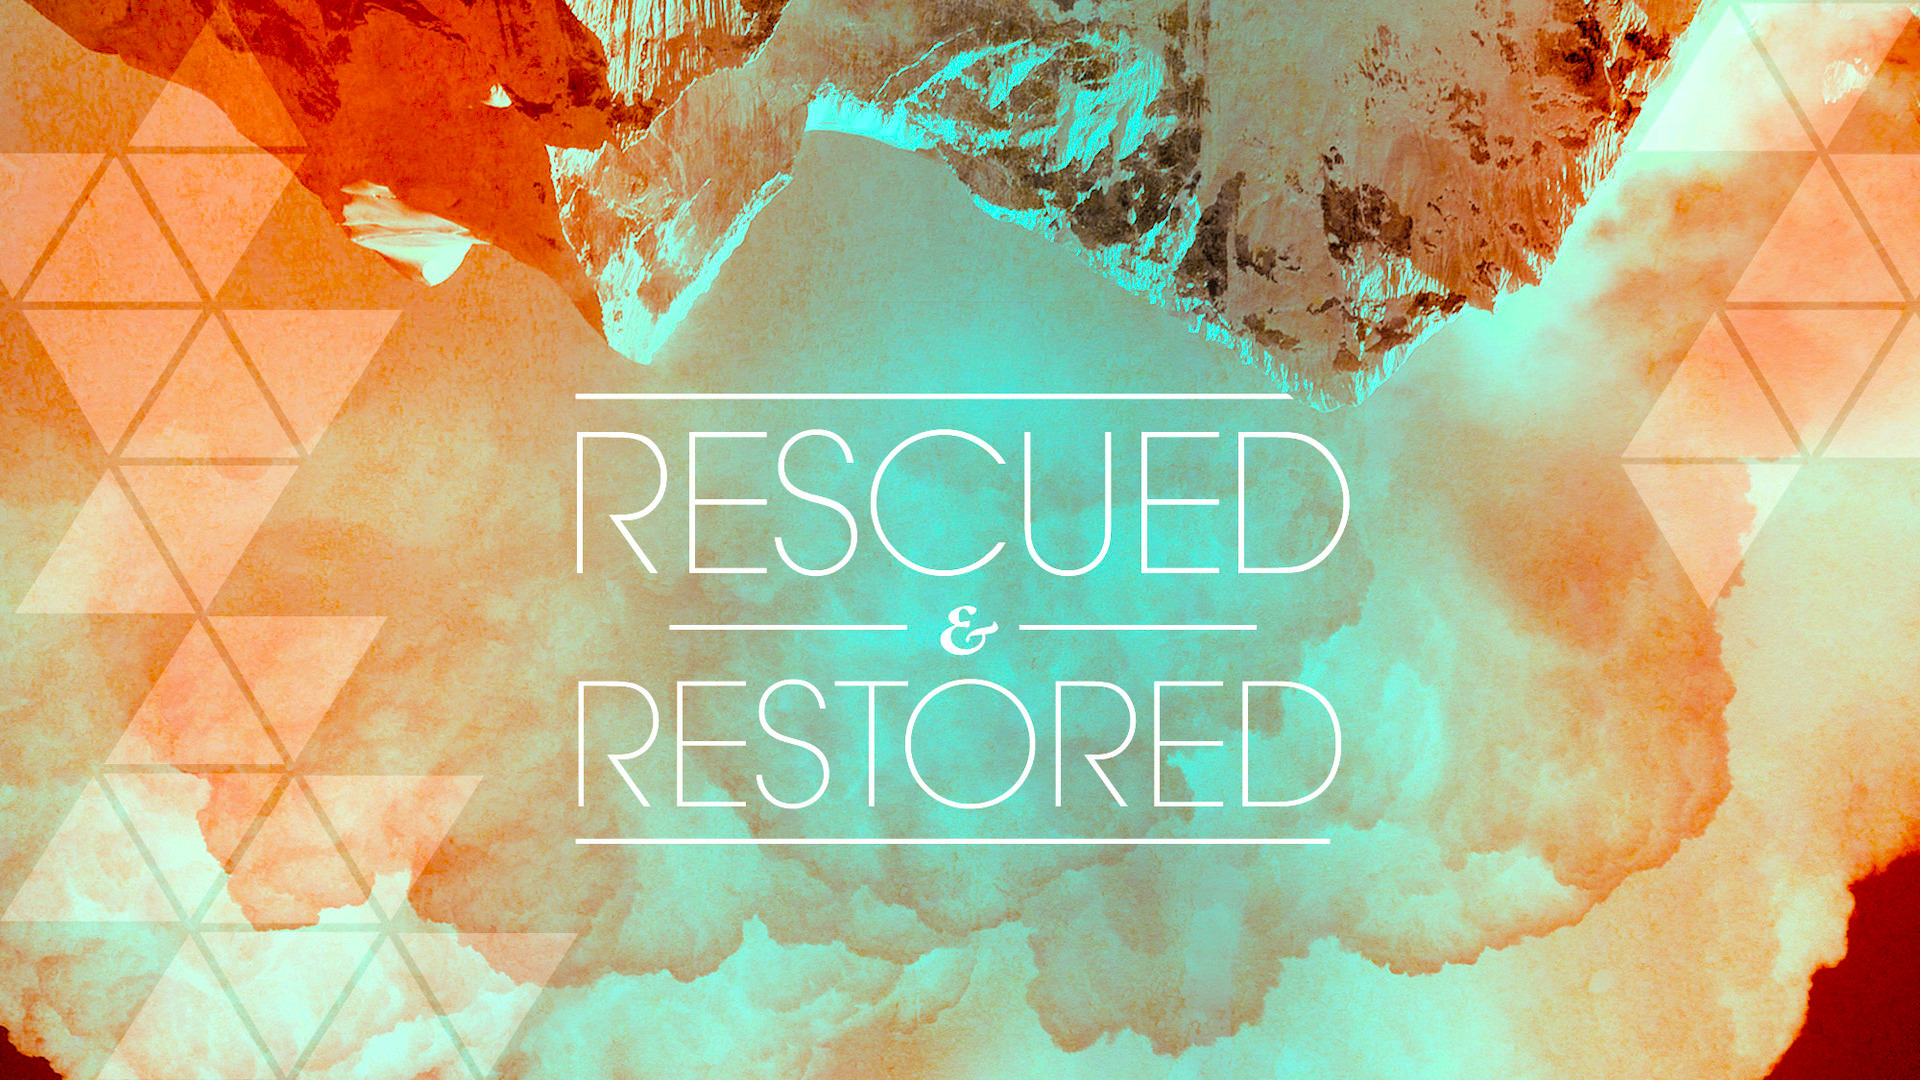 07-24-16 | Rescued & Restored | My Kids Won't Listen to Me | Mark Anderson